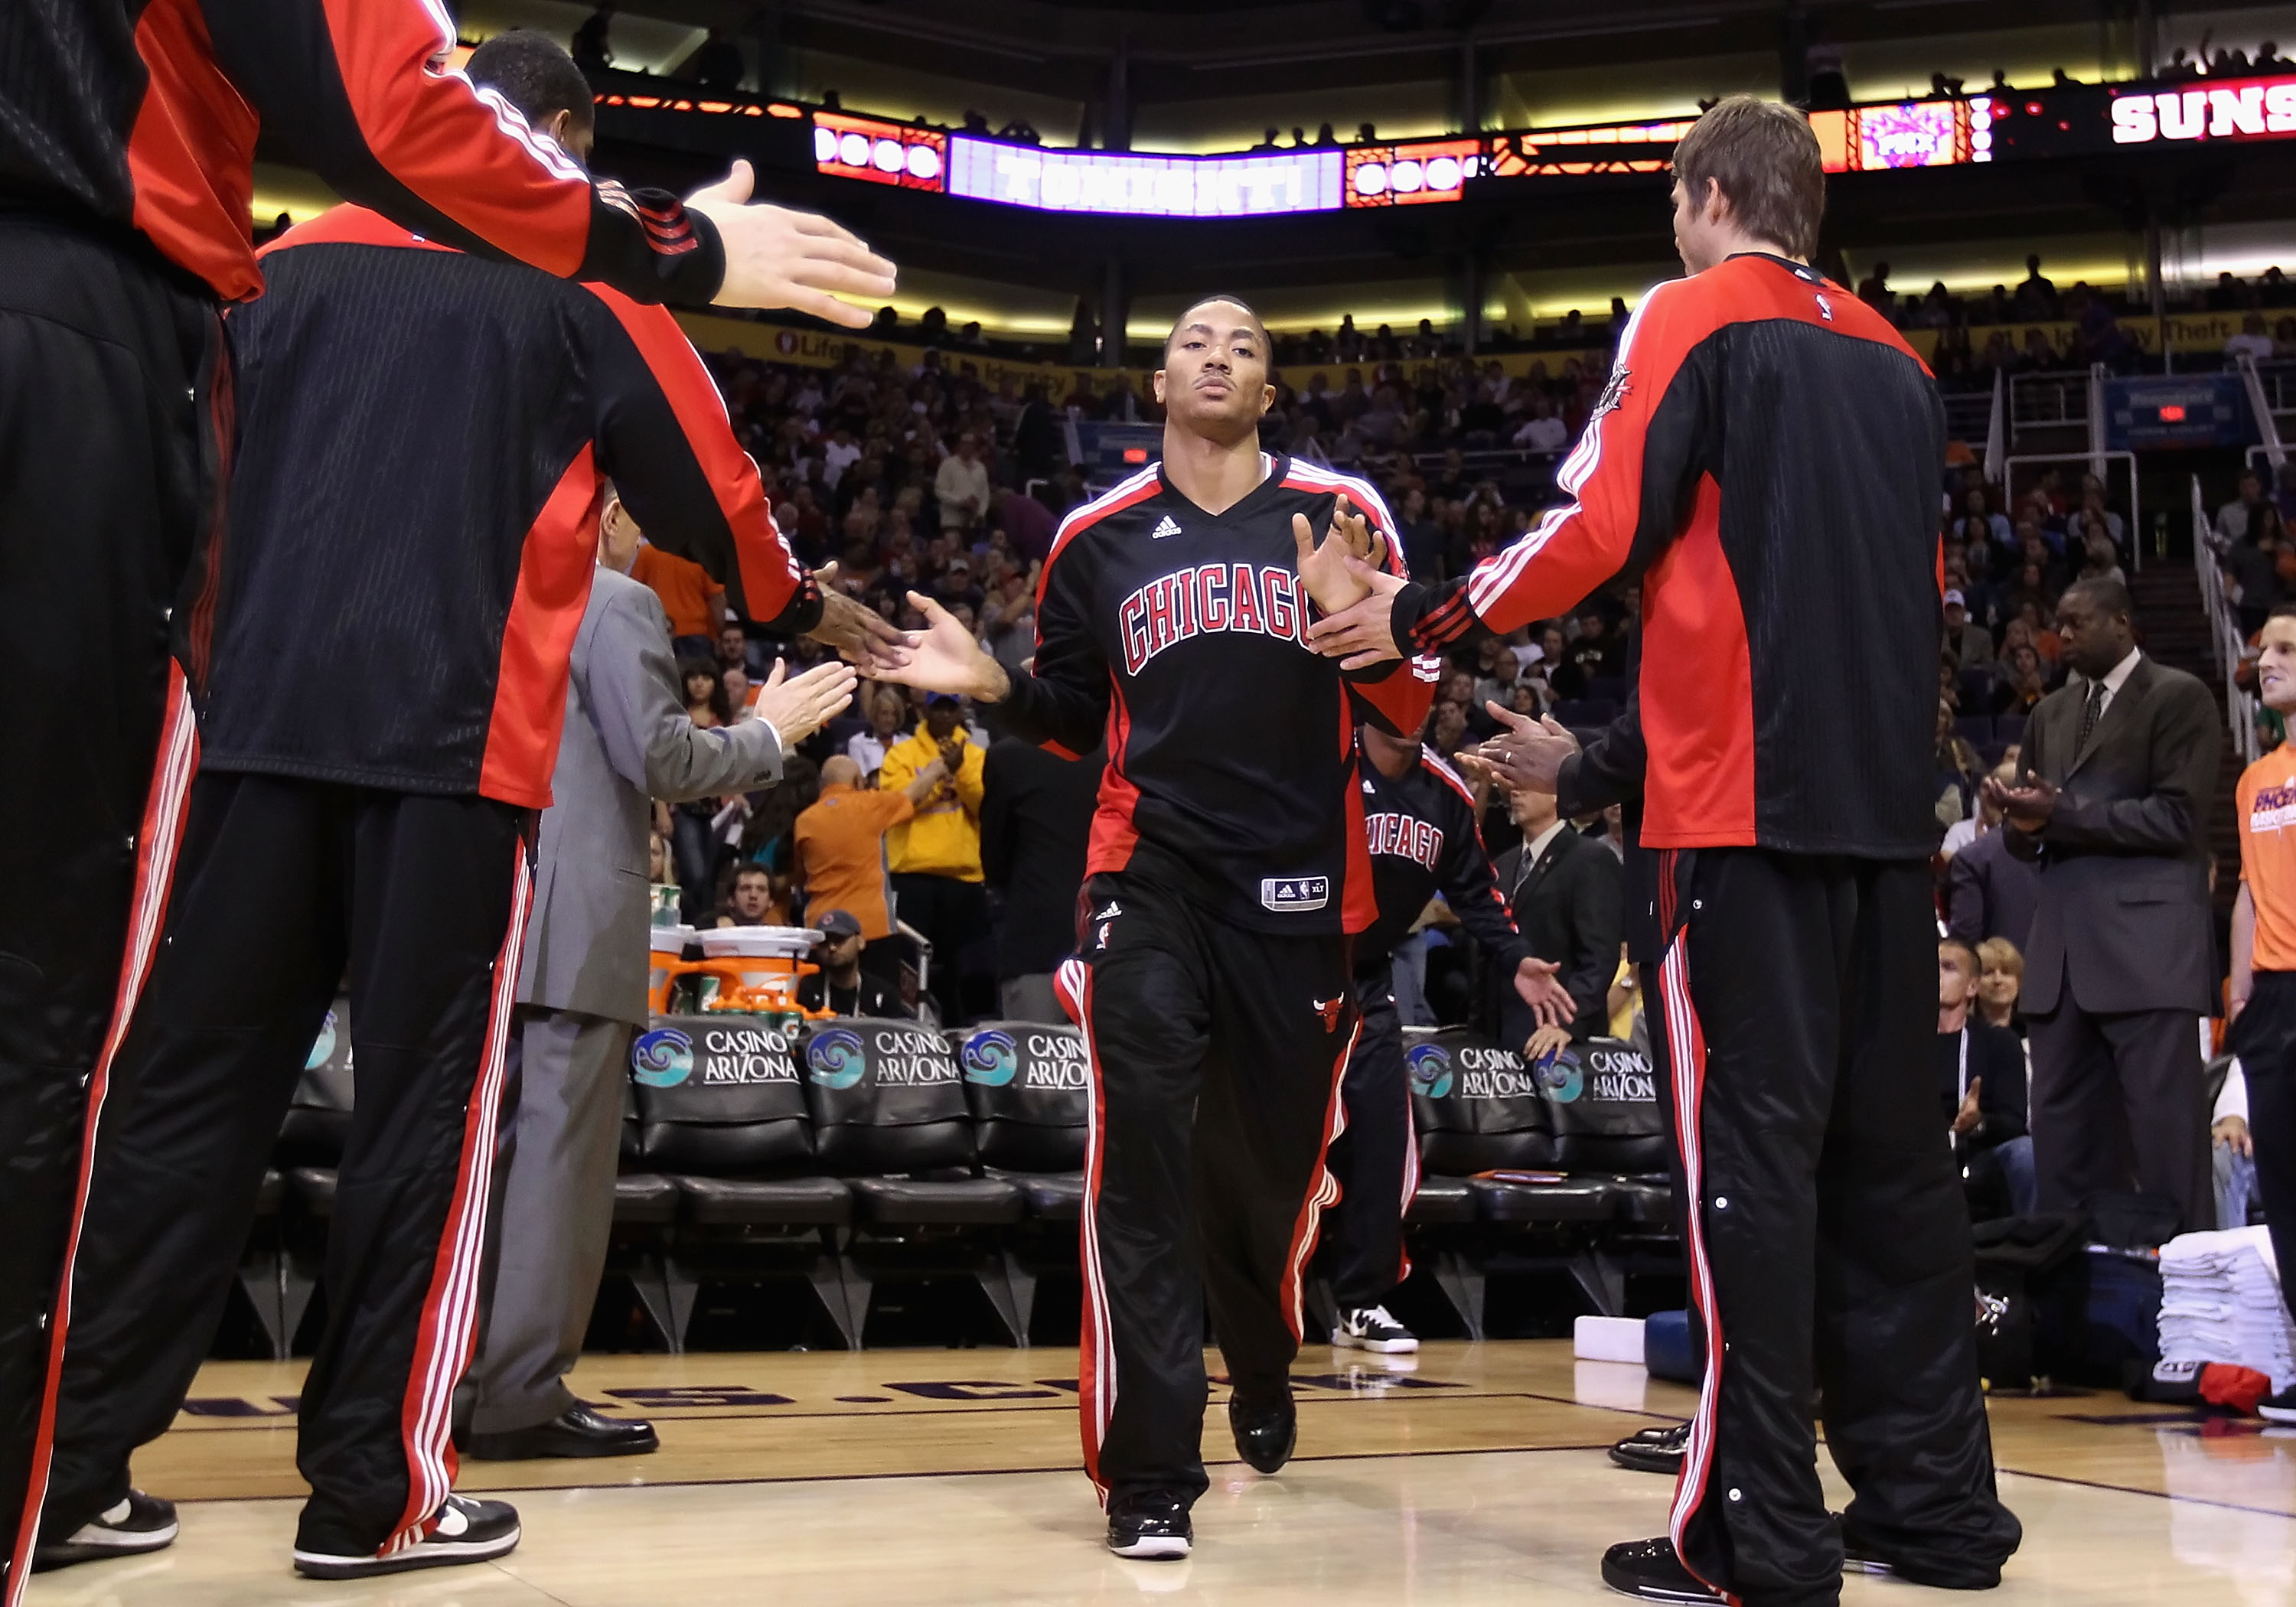 PHOENIX - NOVEMBER 24:  Derrick Rose #1 of the Chicago Bulls is introduced before the NBA game against the Phoenix Suns at US Airways Center on November 24, 2010 in Phoenix, Arizona. NOTE TO USER: User expressly acknowledges and agrees that, by downloadin